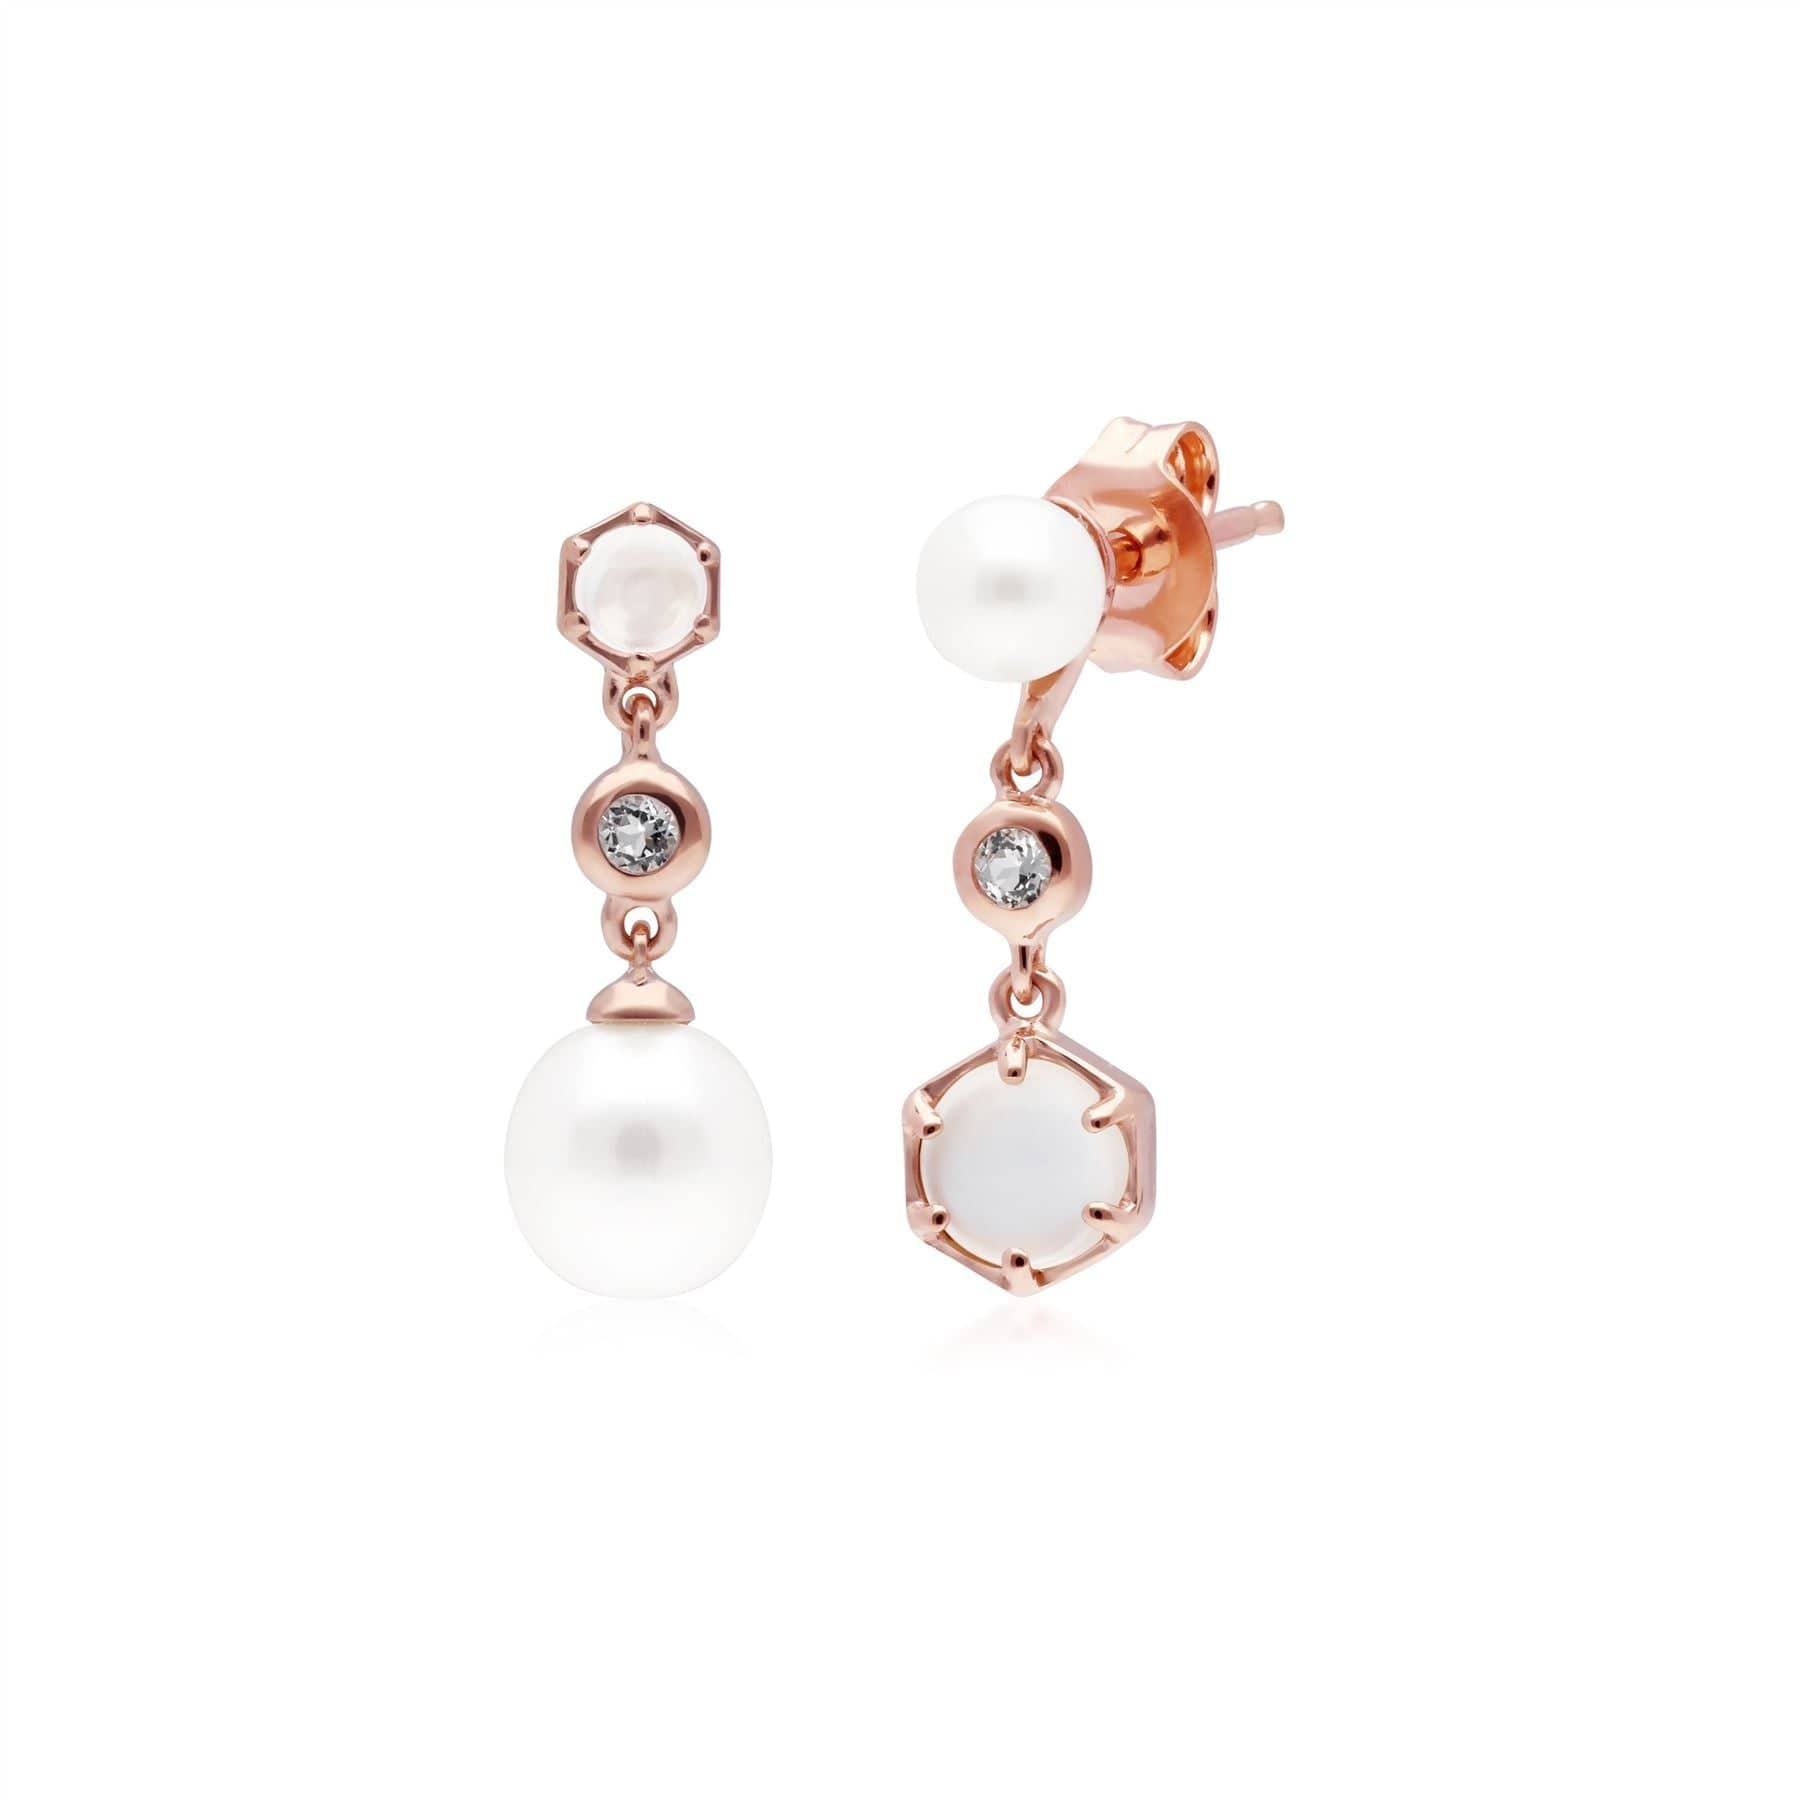 270E030902925 Modern Pearl, Moonstone & Topaz Mismatched Drop Earrings in Rose Gold Plated Silver 1